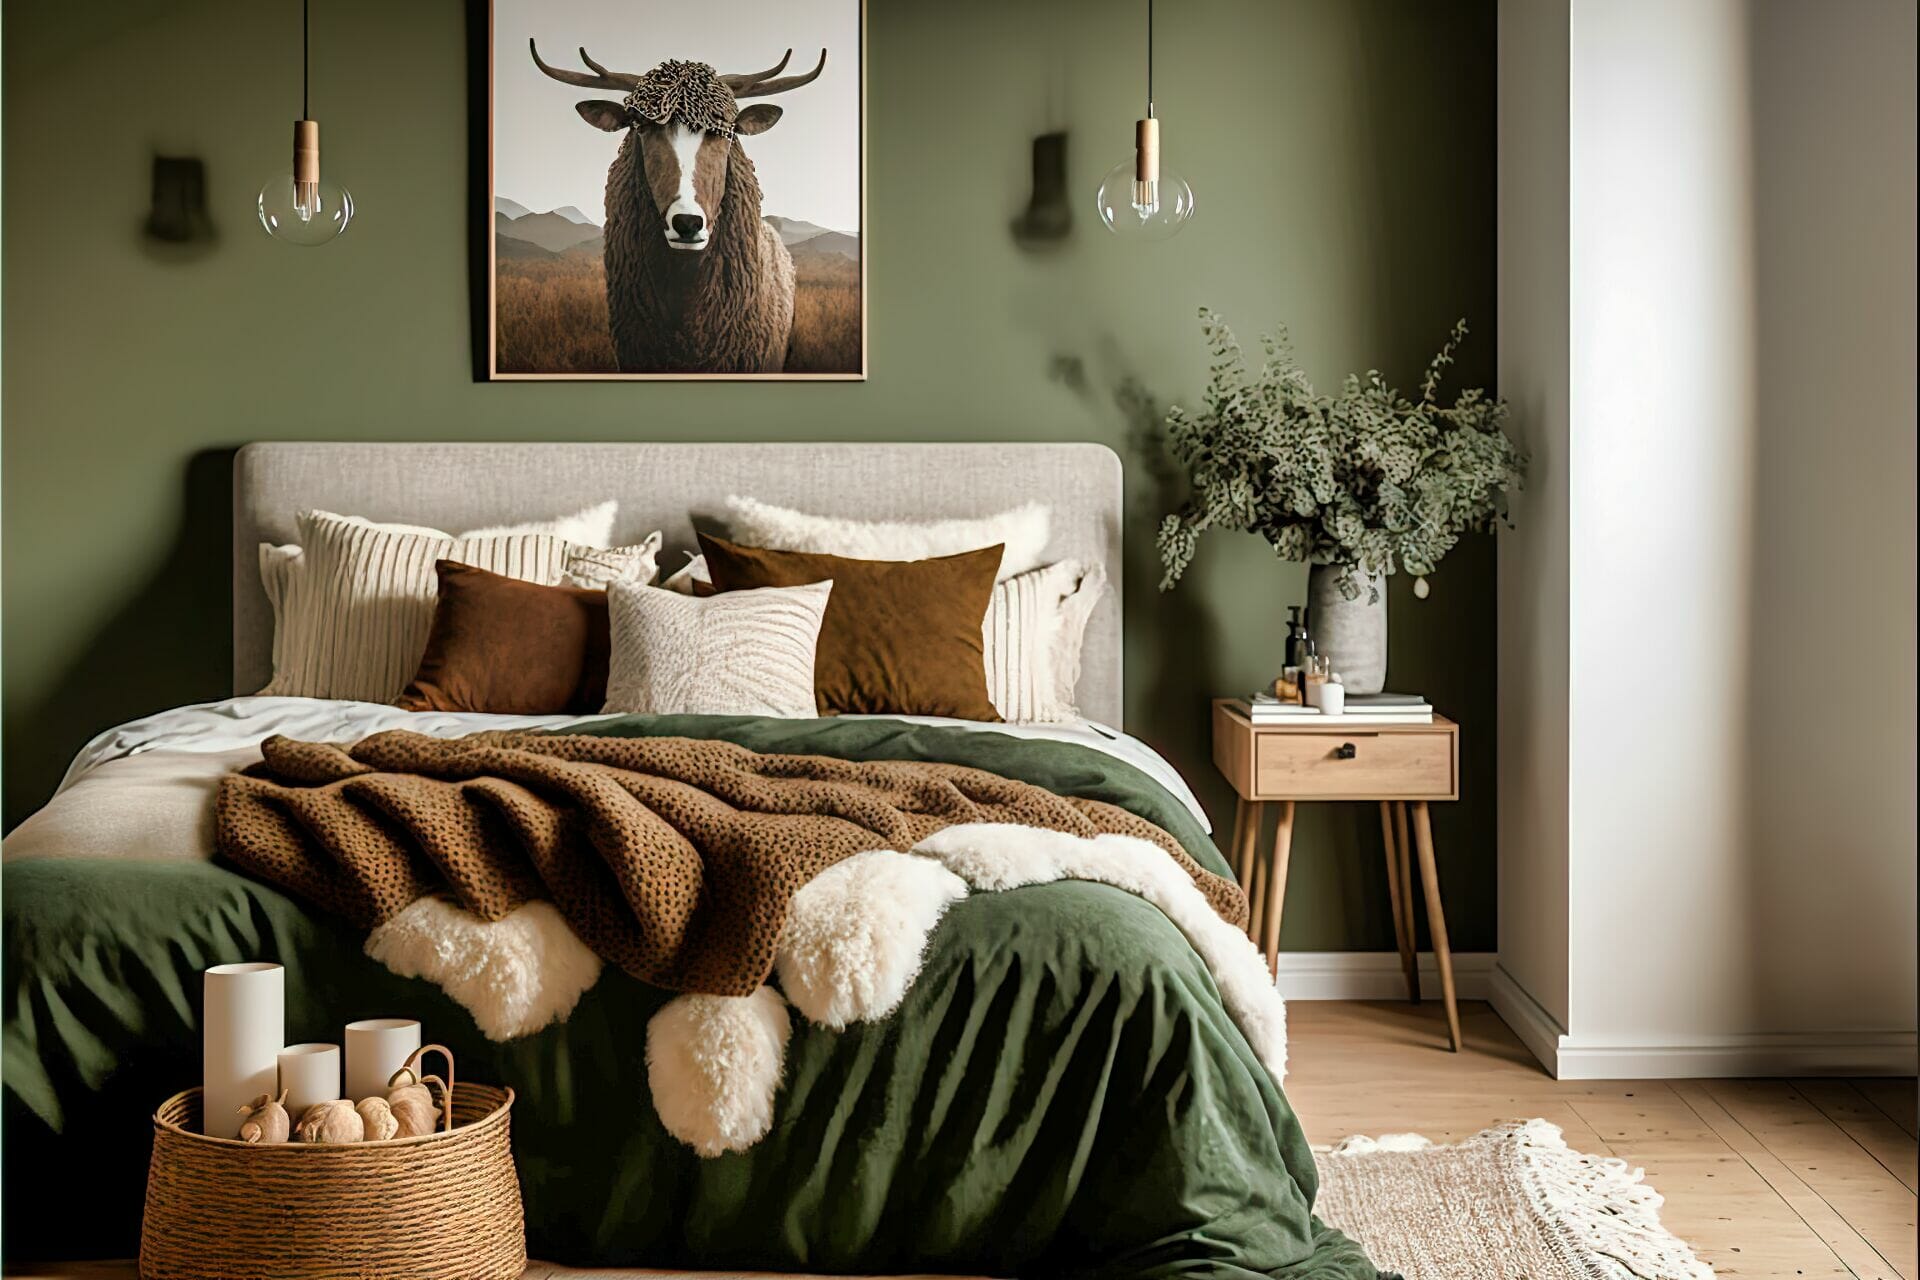 A Scandinavian Style Bedroom With Brown And Green Accents – This Bedroom Is Decorated With Calming Browns And Greens For A Peaceful And Natural Look. The Walls Are A Light Brown, While The Bed Frame And Nightstand Are A Dark Wood. To Complete The Look, A White Sheepskin Rug Lies On The Floor, And Art Prints With Brown And Green Colors Hang On The Walls.